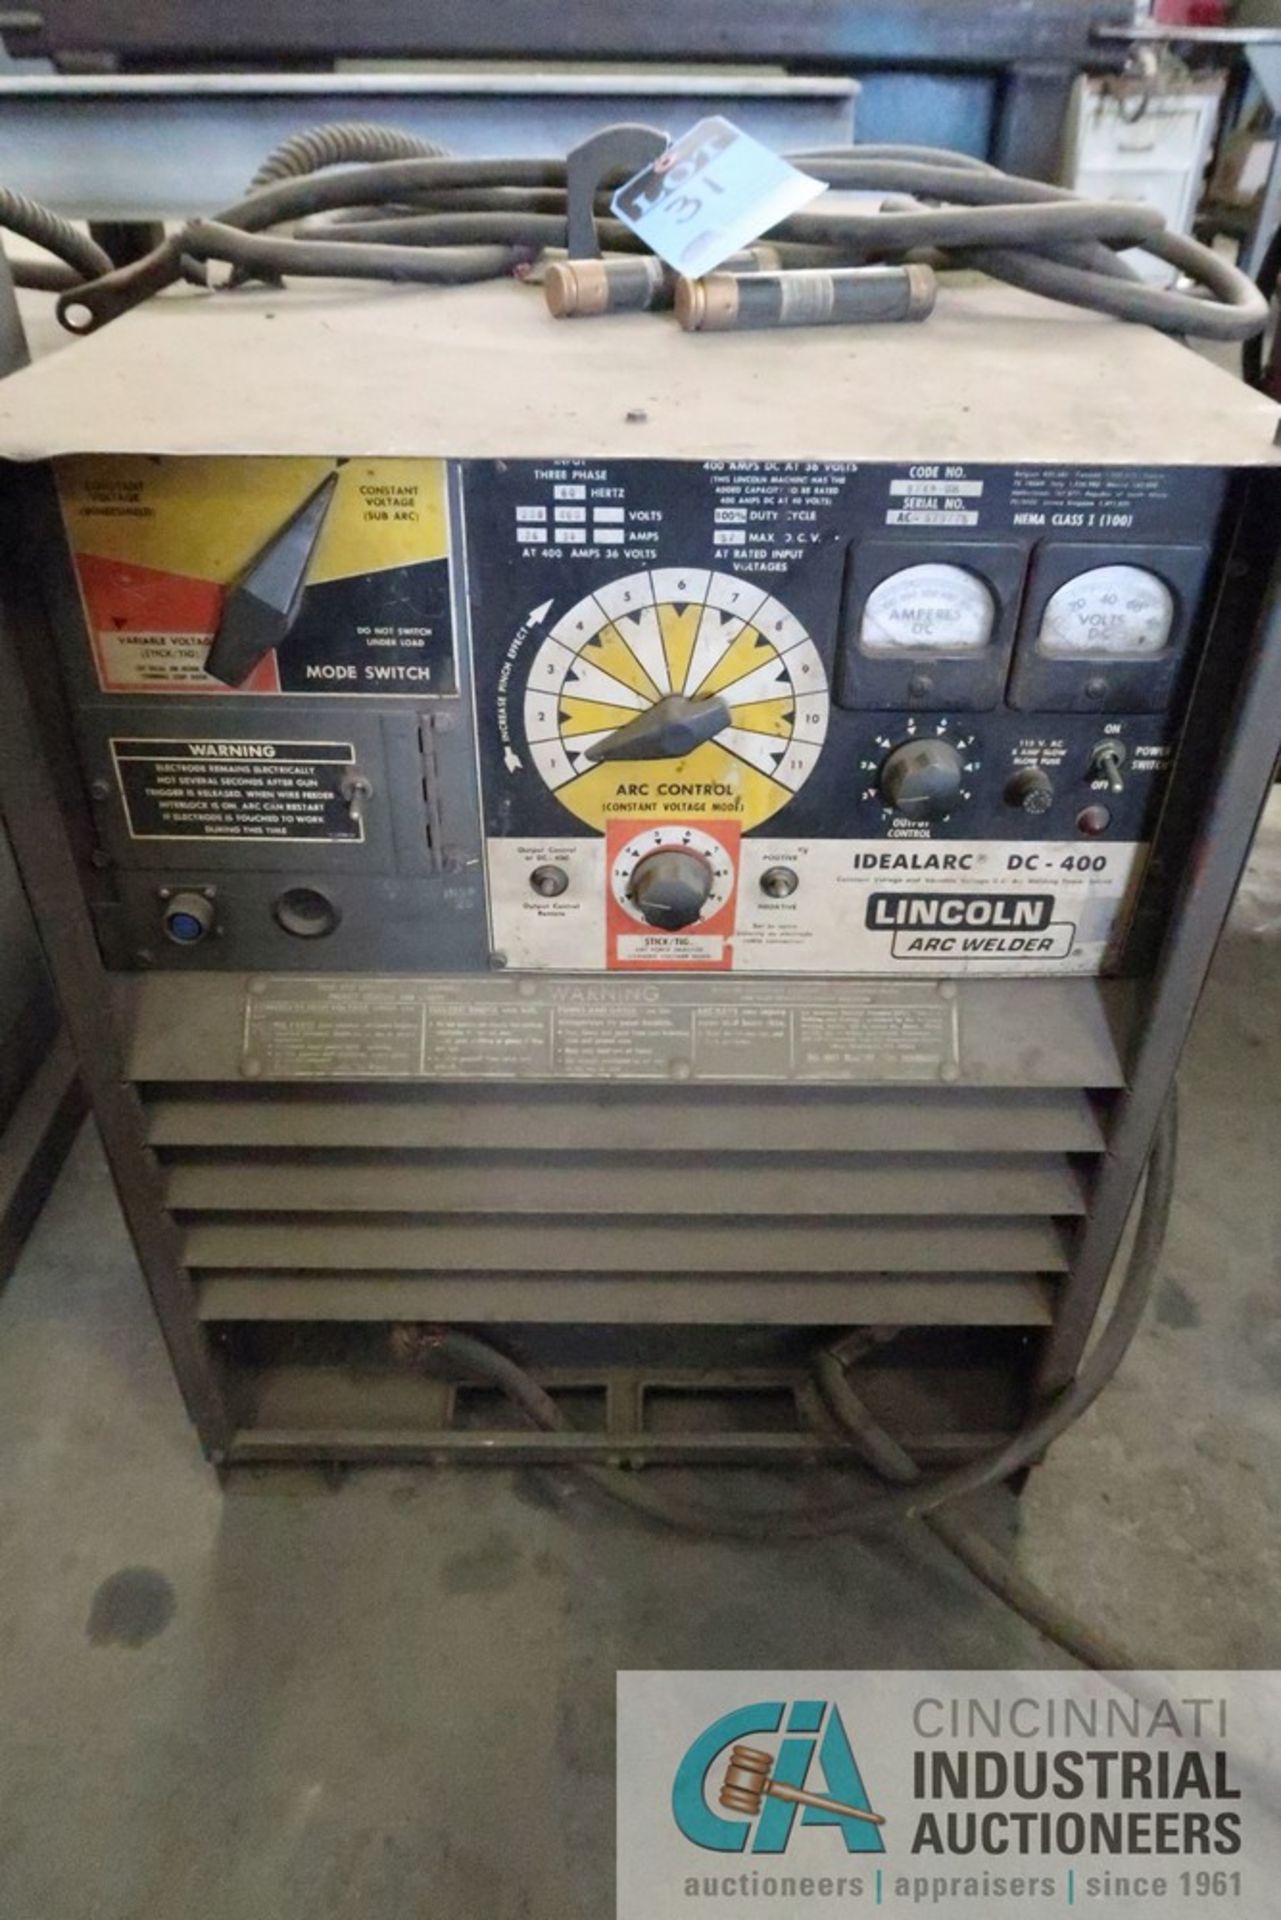 400 AMP LINCOLN ELECTRIC MODEL DC-400 ARC WELDING POWER SOURCE - Image 3 of 6